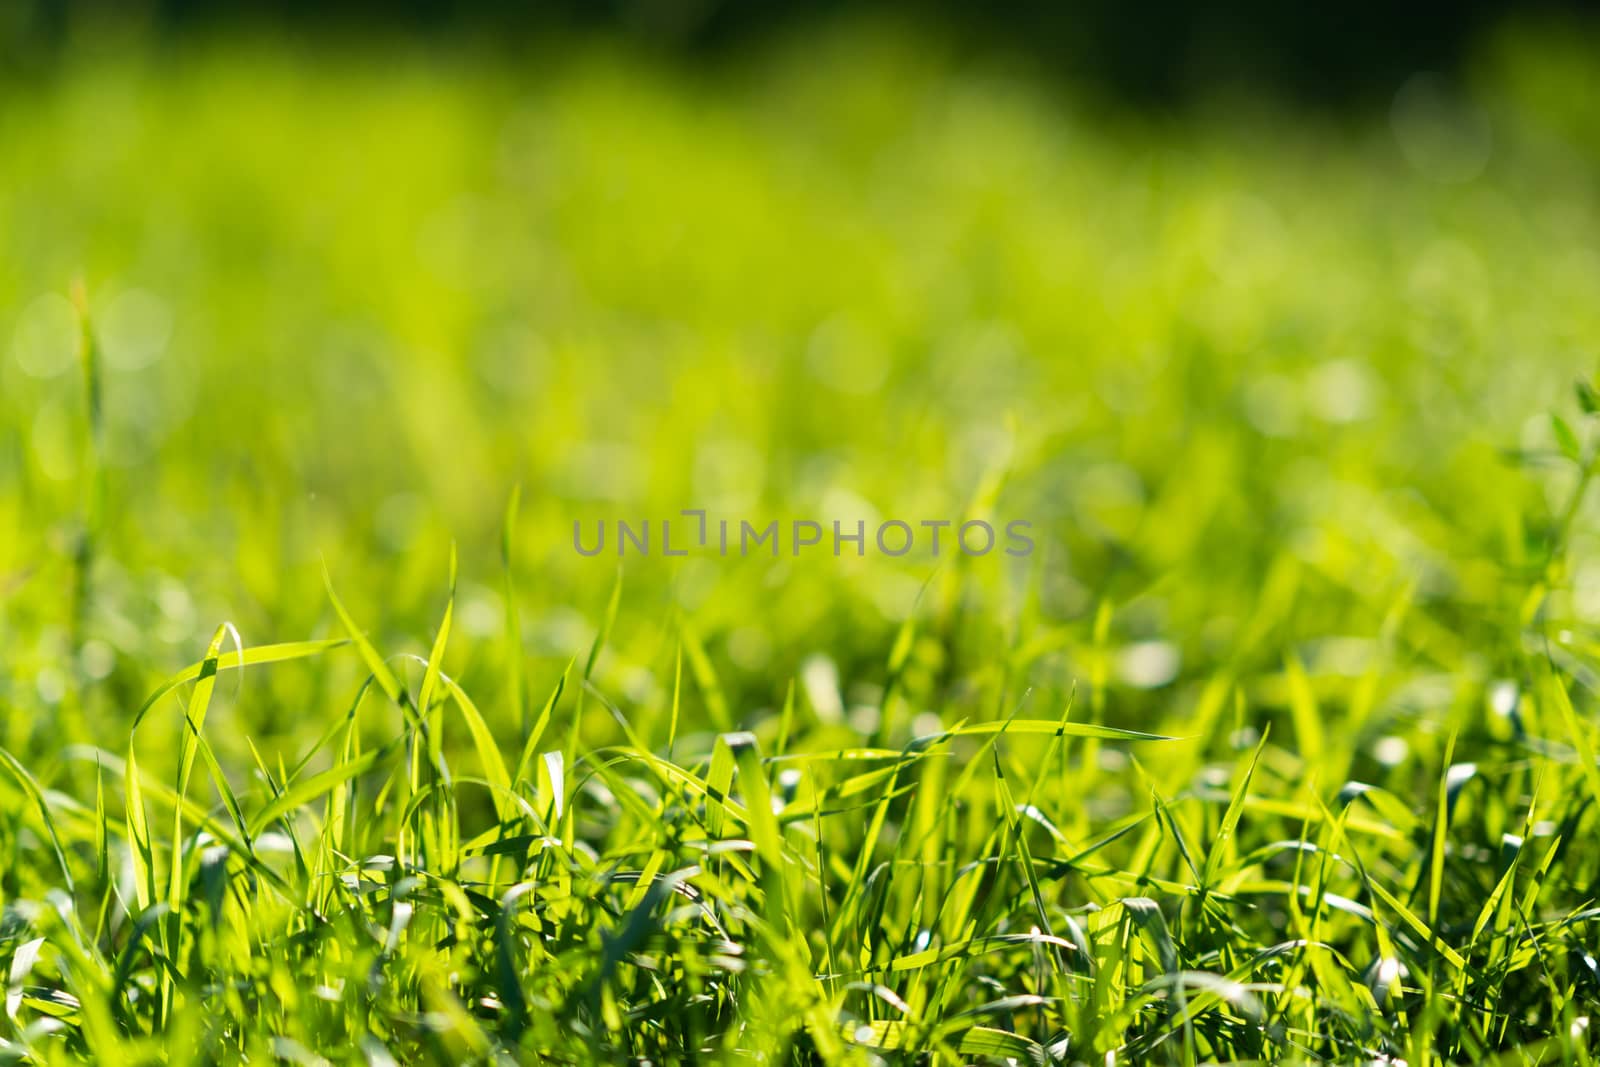 Very green and fresh grass. Symbol of freshness and natural. Brightness and hue colour. Close-up view.